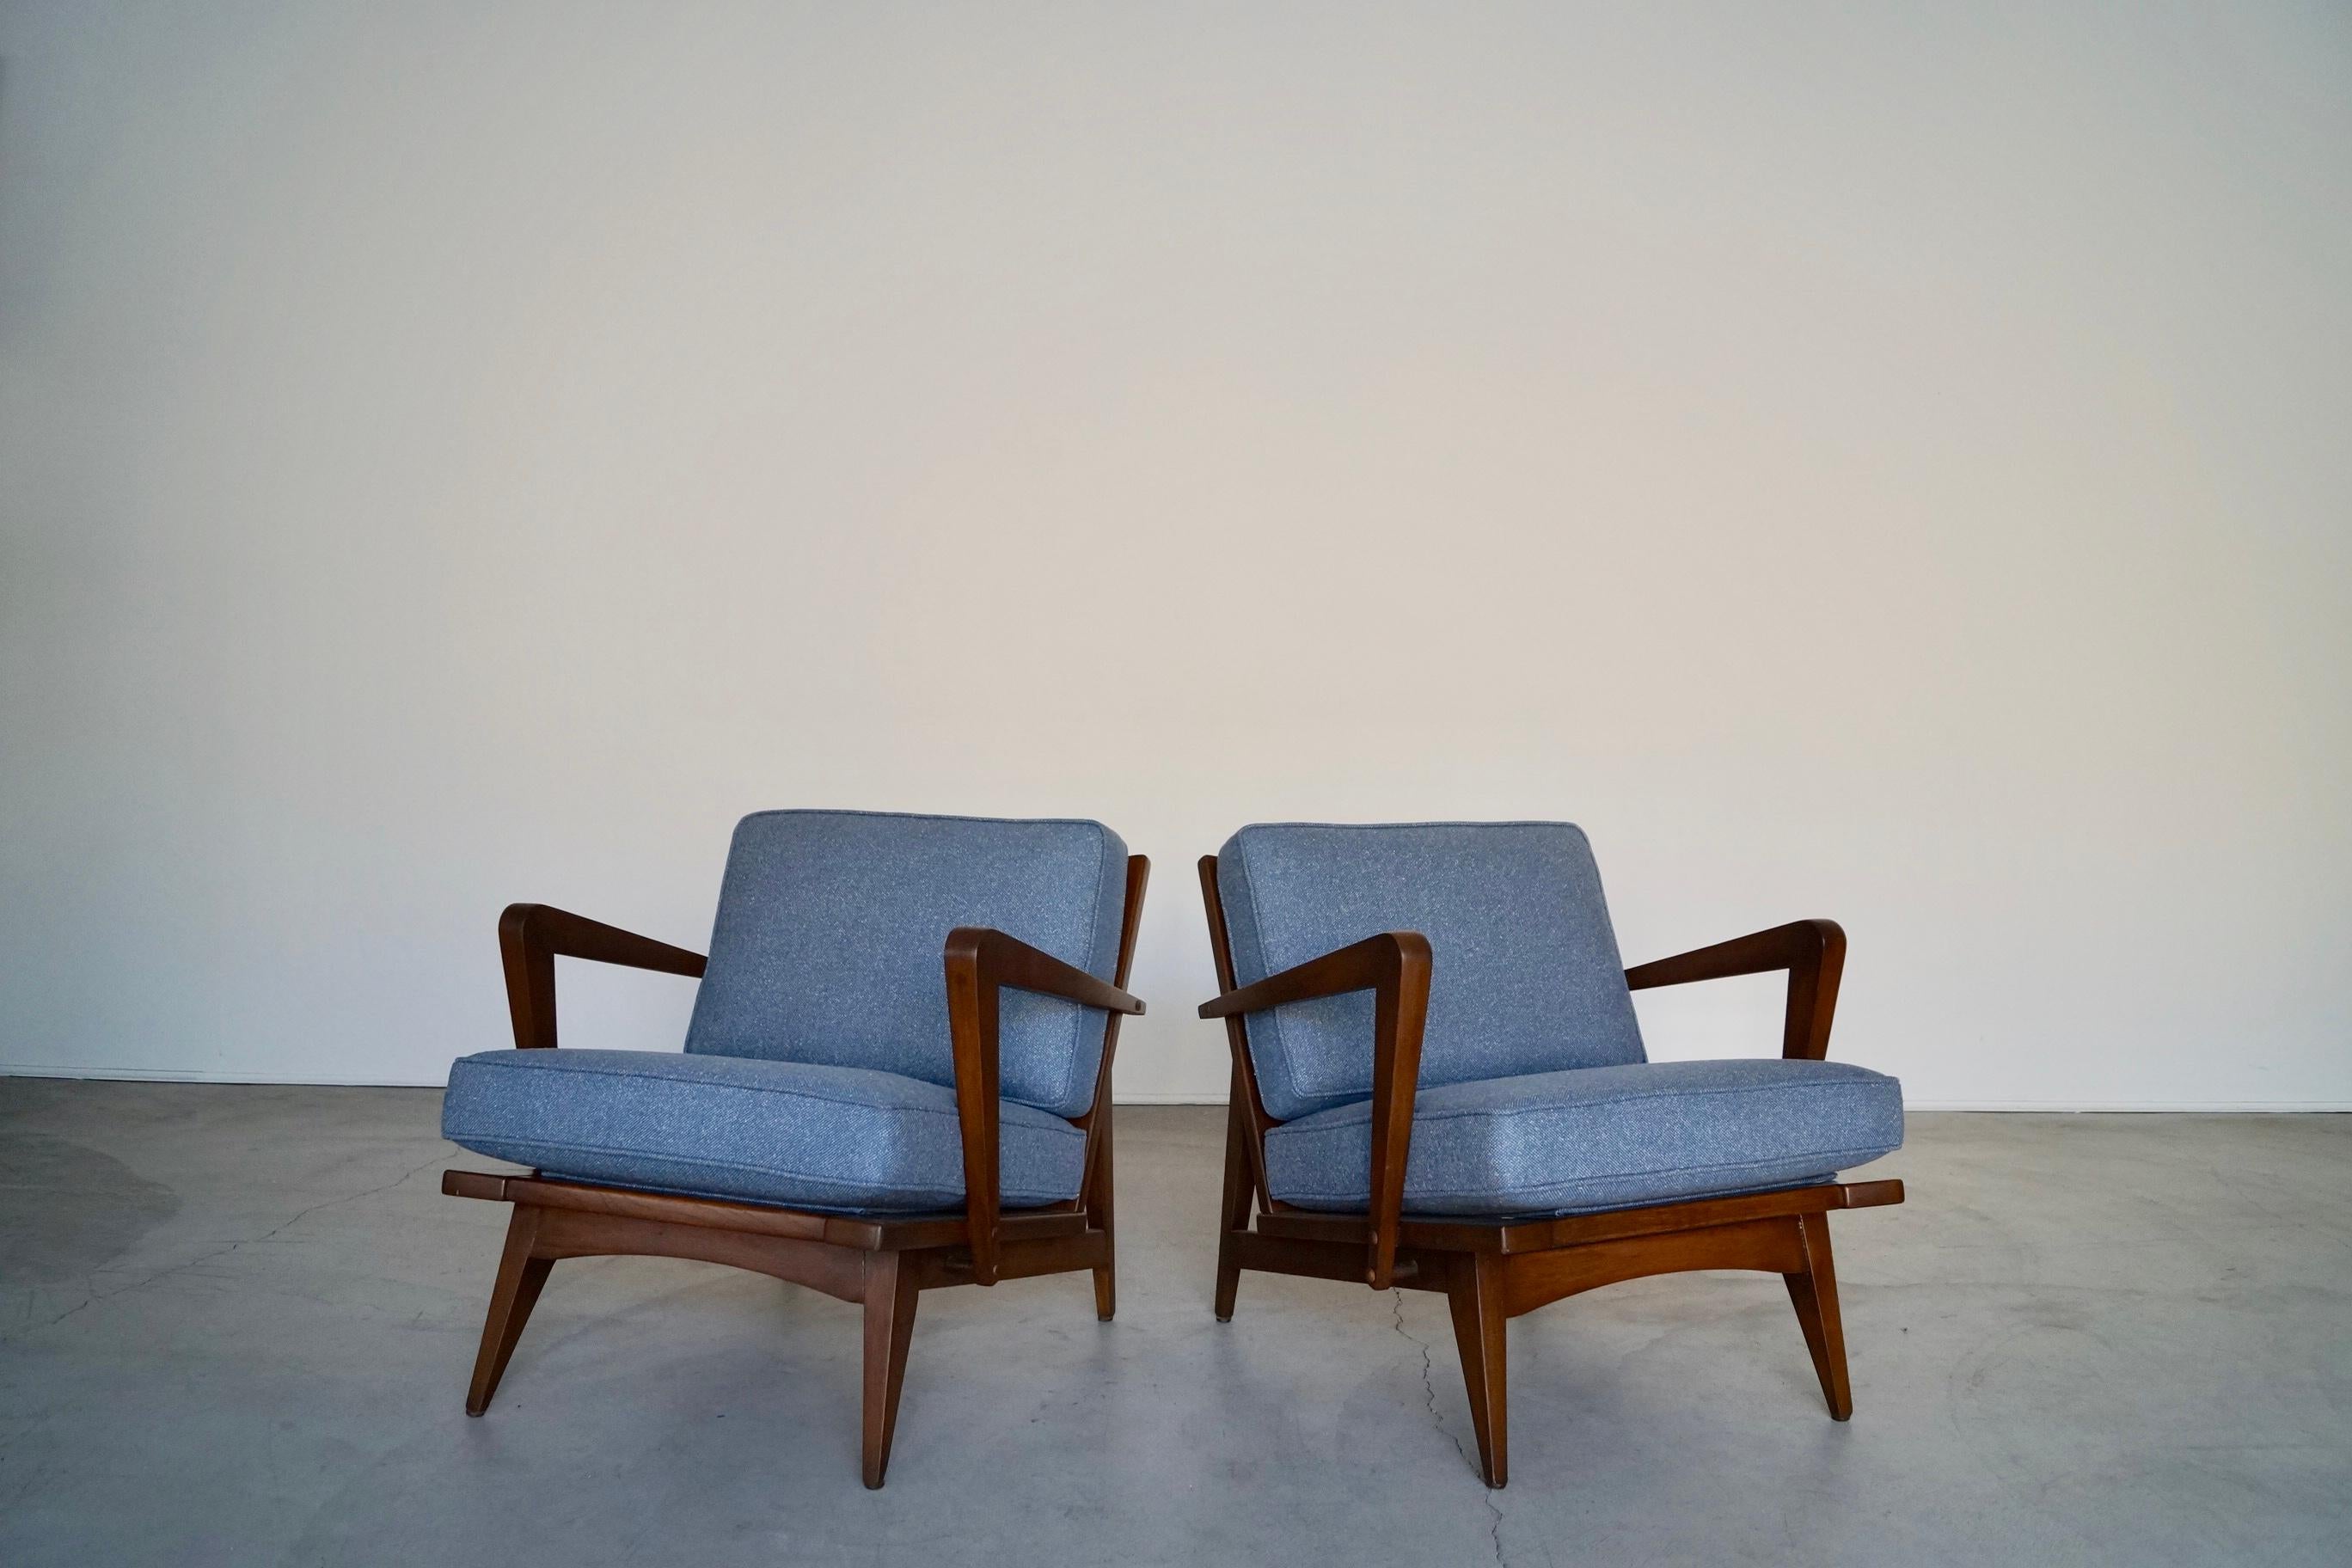 American 1950's Mid-Century Modern Lounge Chairs - a Pair